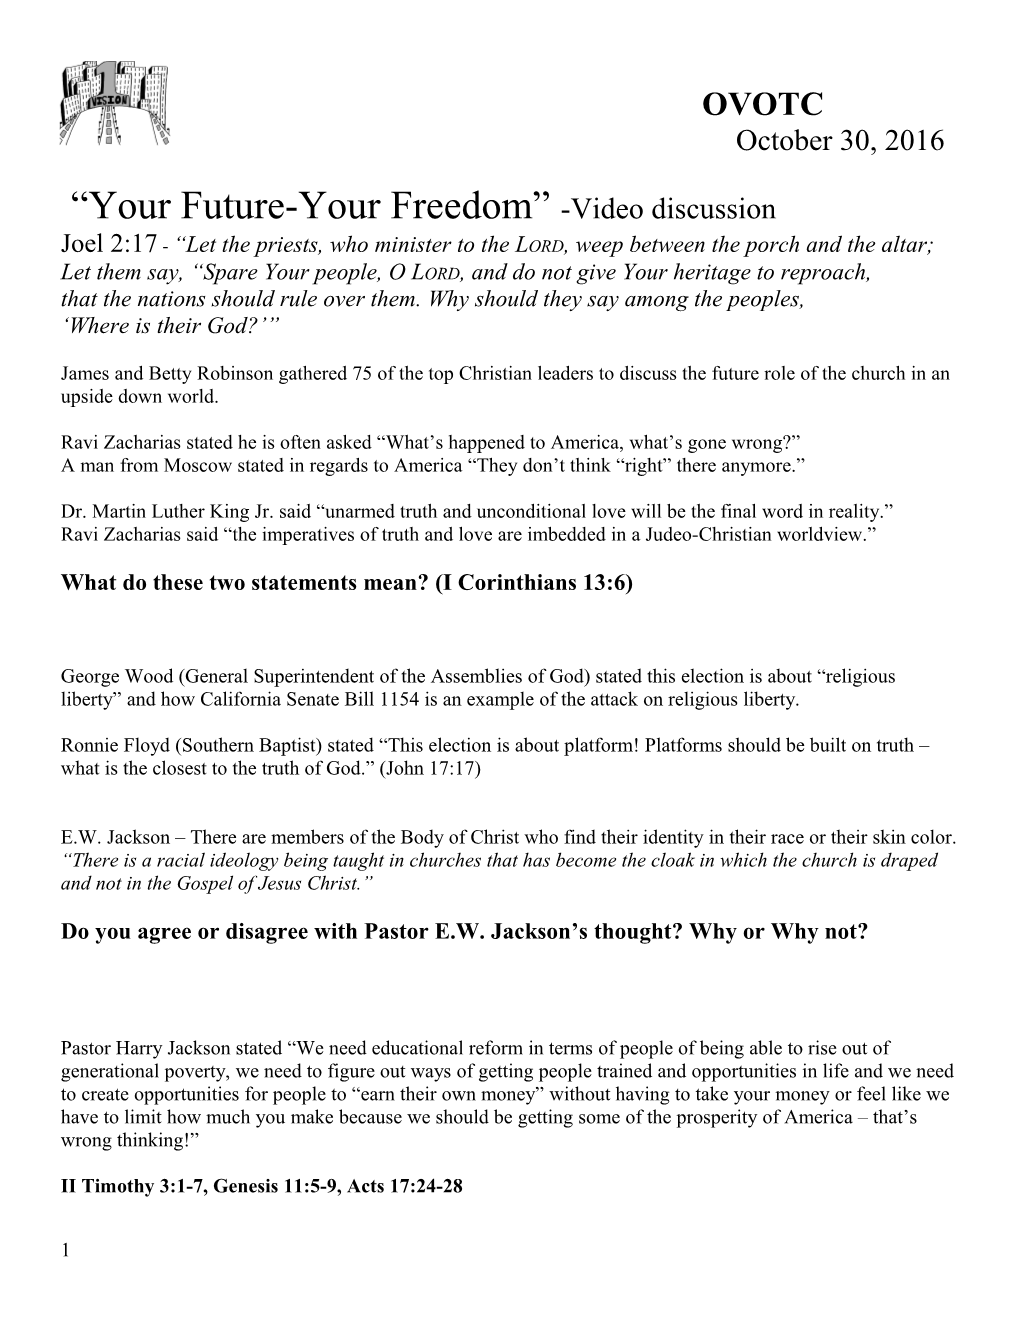 Your Future-Your Freedom -Video Discussion